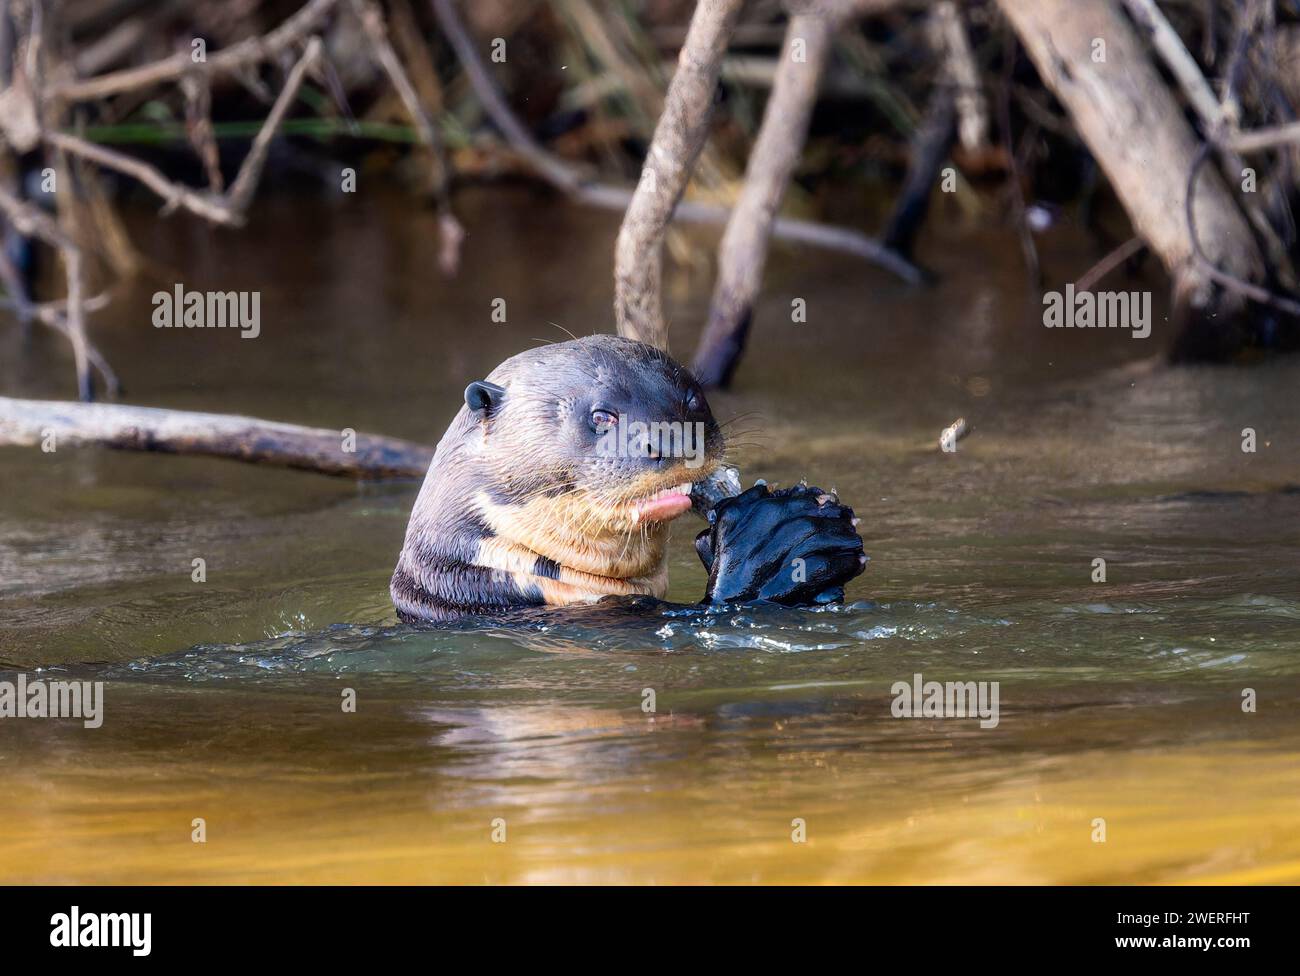 Giant River Otter (Pteronura brasiliensis) Swimming in a River asnd Eating an Armored Catfish in Brazil Stock Photo